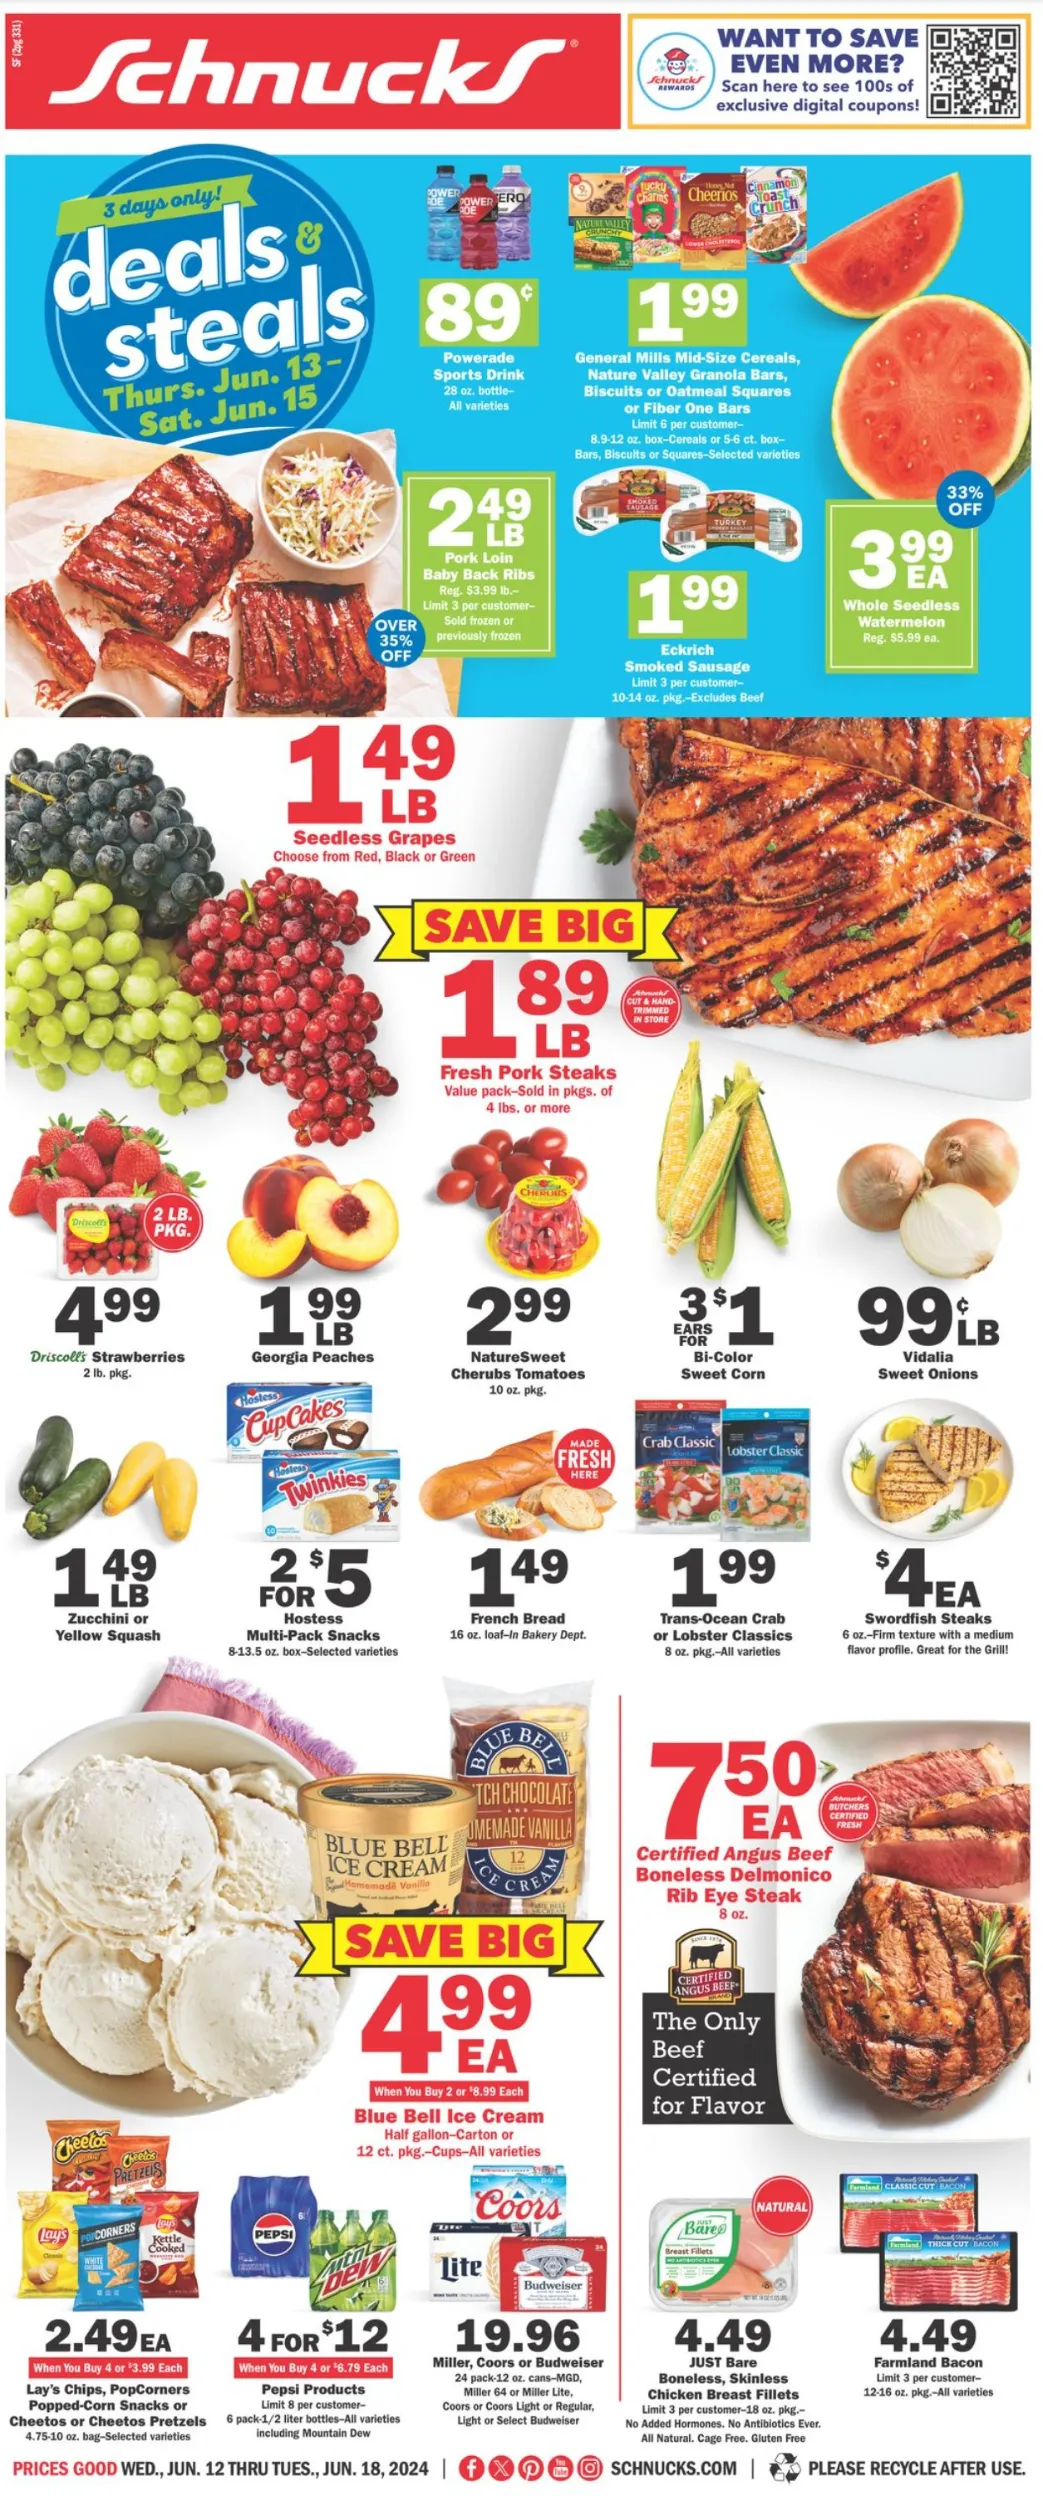 Schnucks Weekly Ad July 2024 Weekly Sales, Deals, Discounts and Digital Coupons.